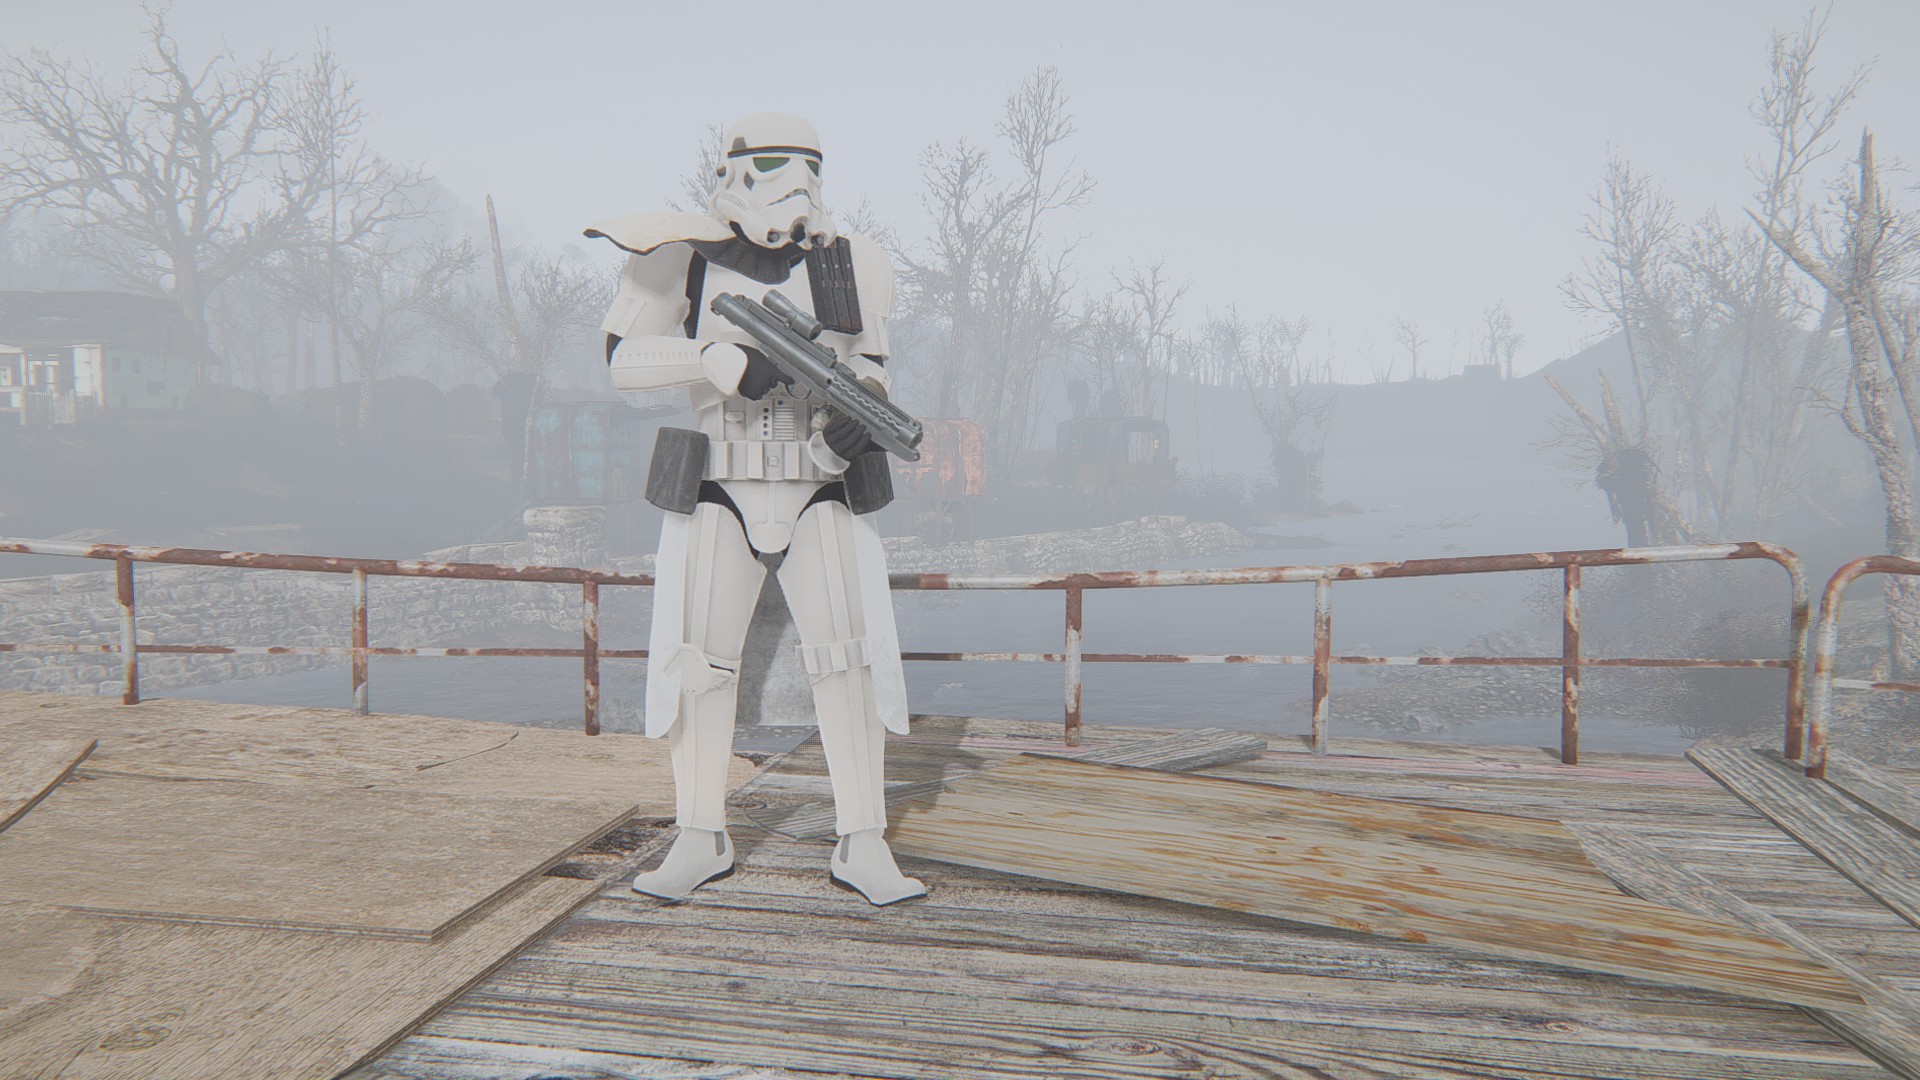 fallout 4 star wars weapons mod